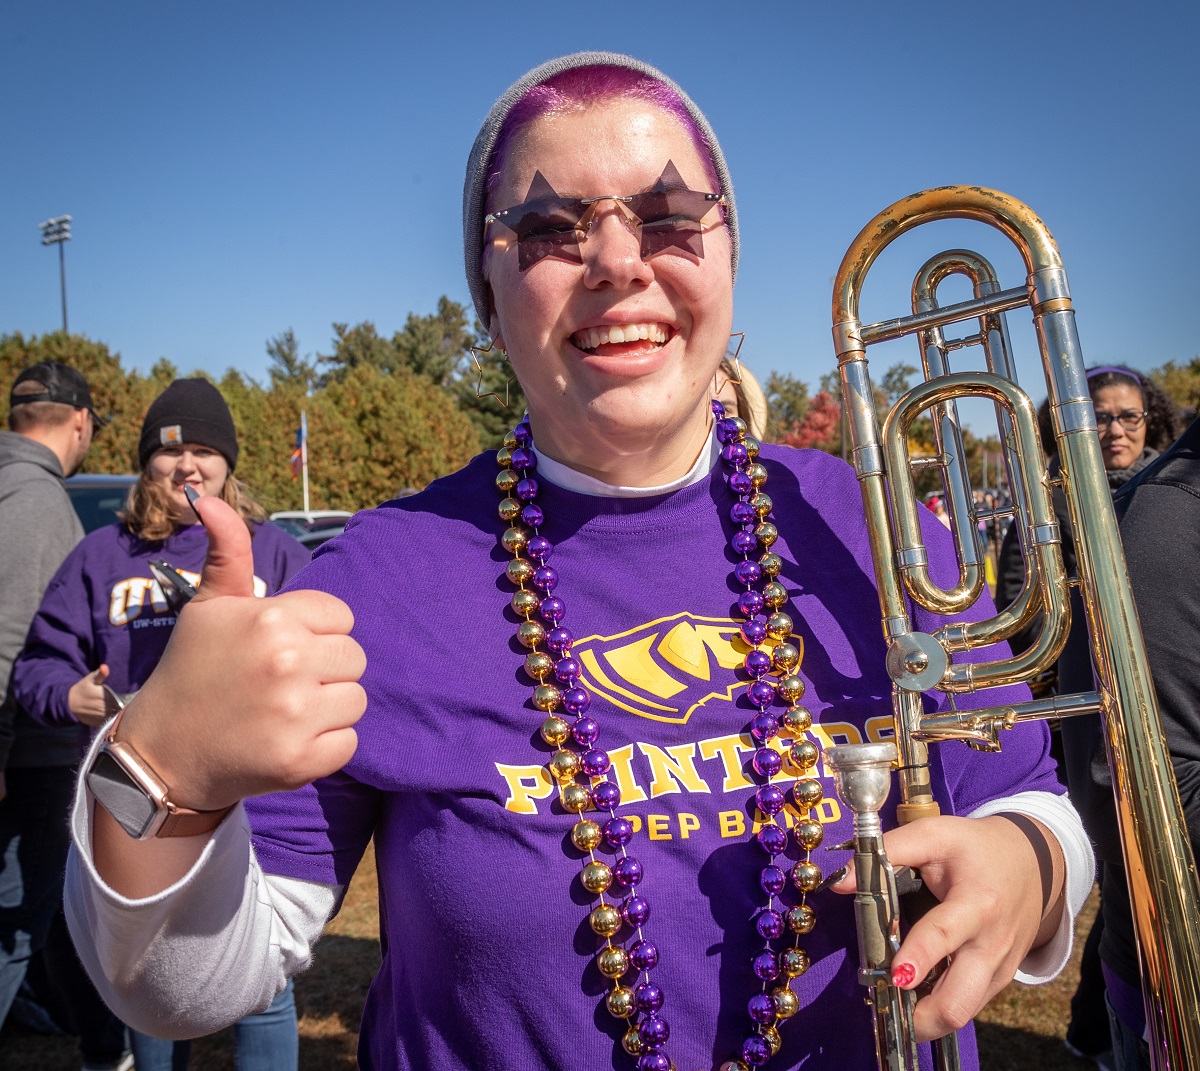 Celebrate the Pointer spirit at UW-Stevens Point’s “Top Dawgs” Homecoming festivities on Saturday, Oct. 21.